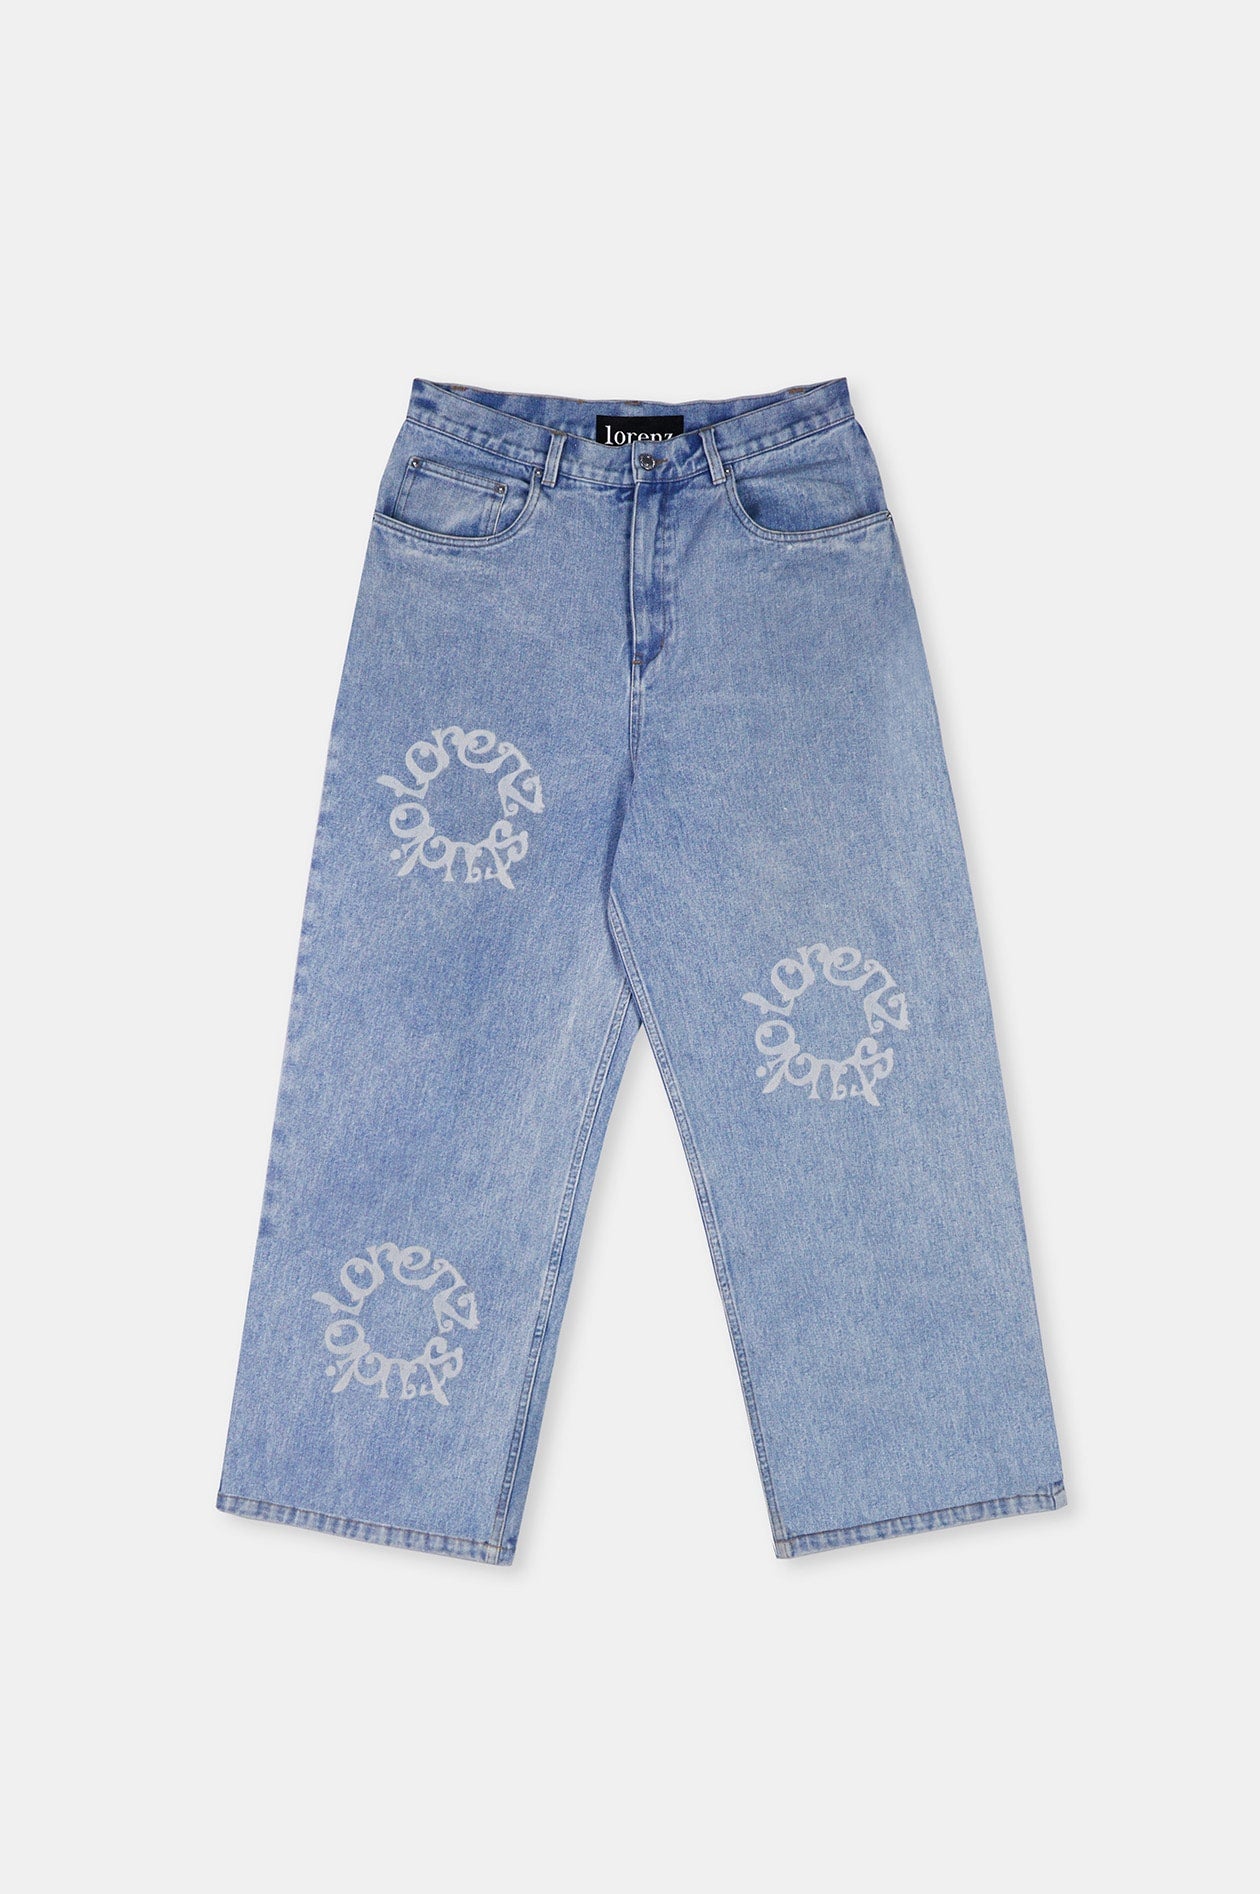 Neptune Loose Fitted Jeans - Acid Wash Blue